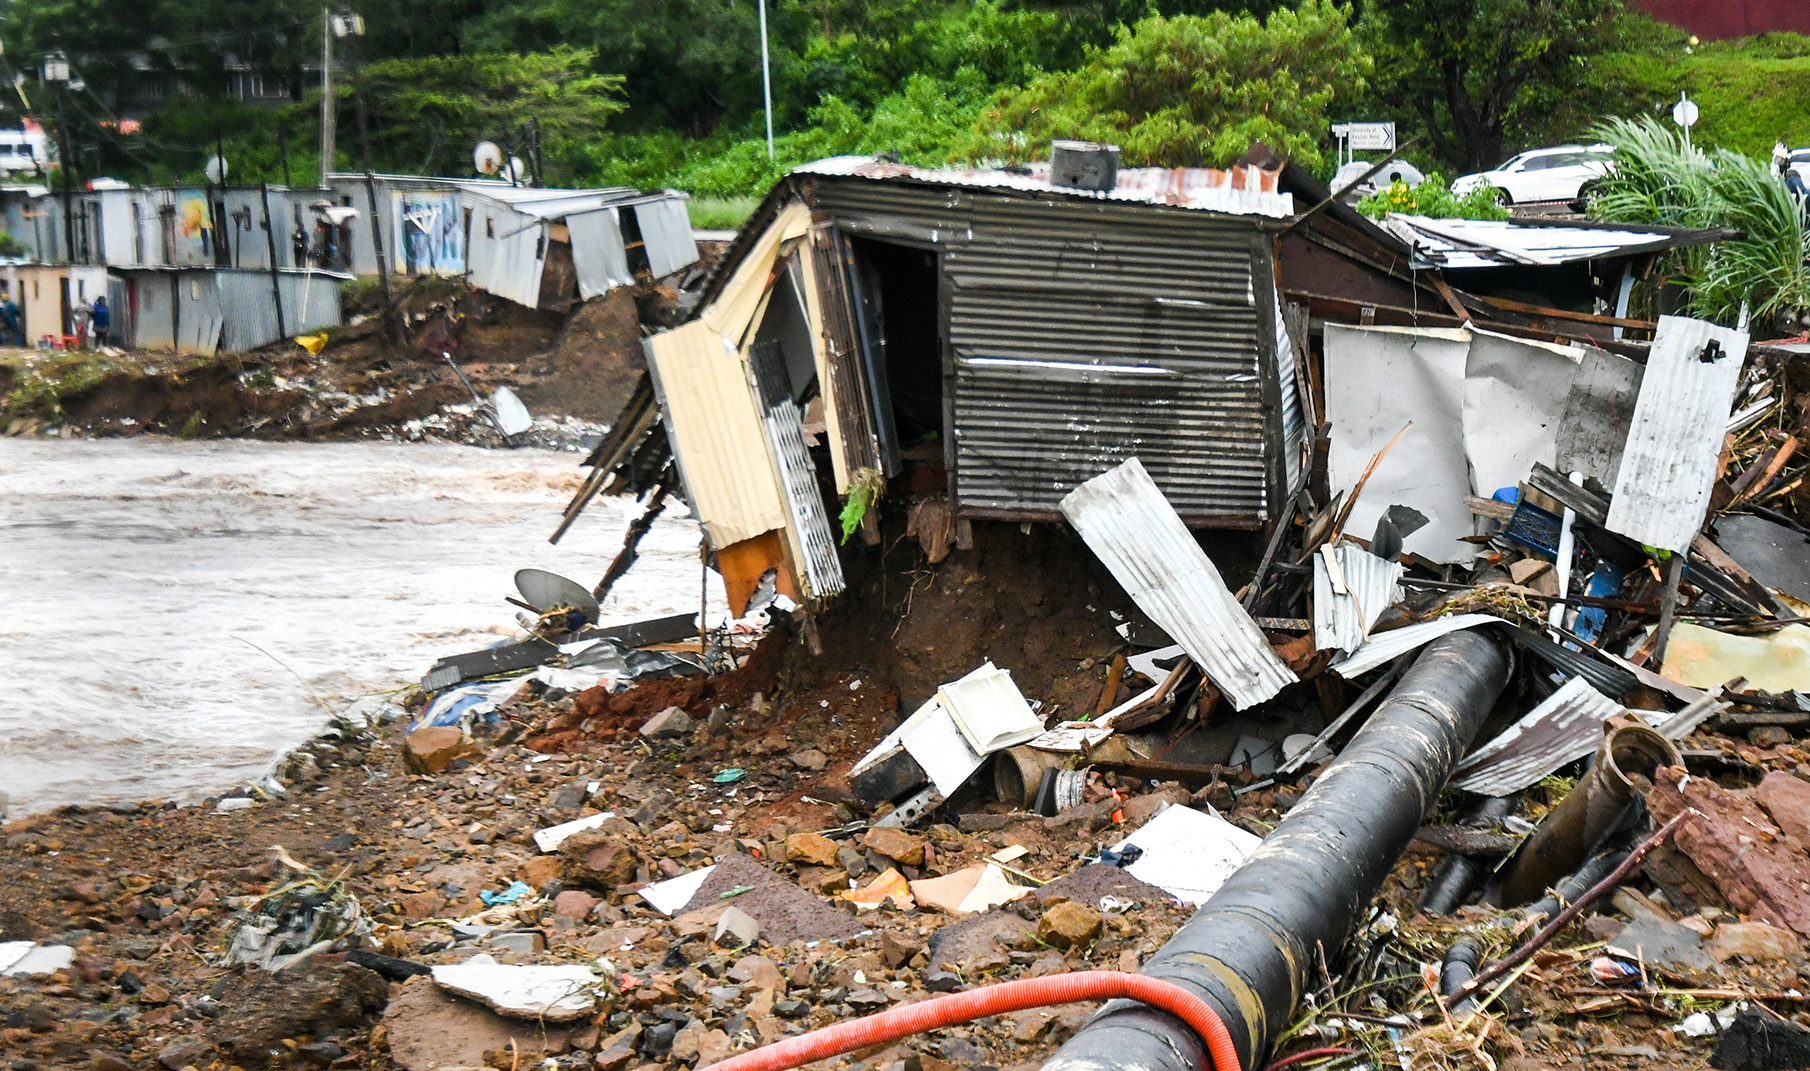 Shacks washed away at the informal settlement between M19 and Quarry road in Durban